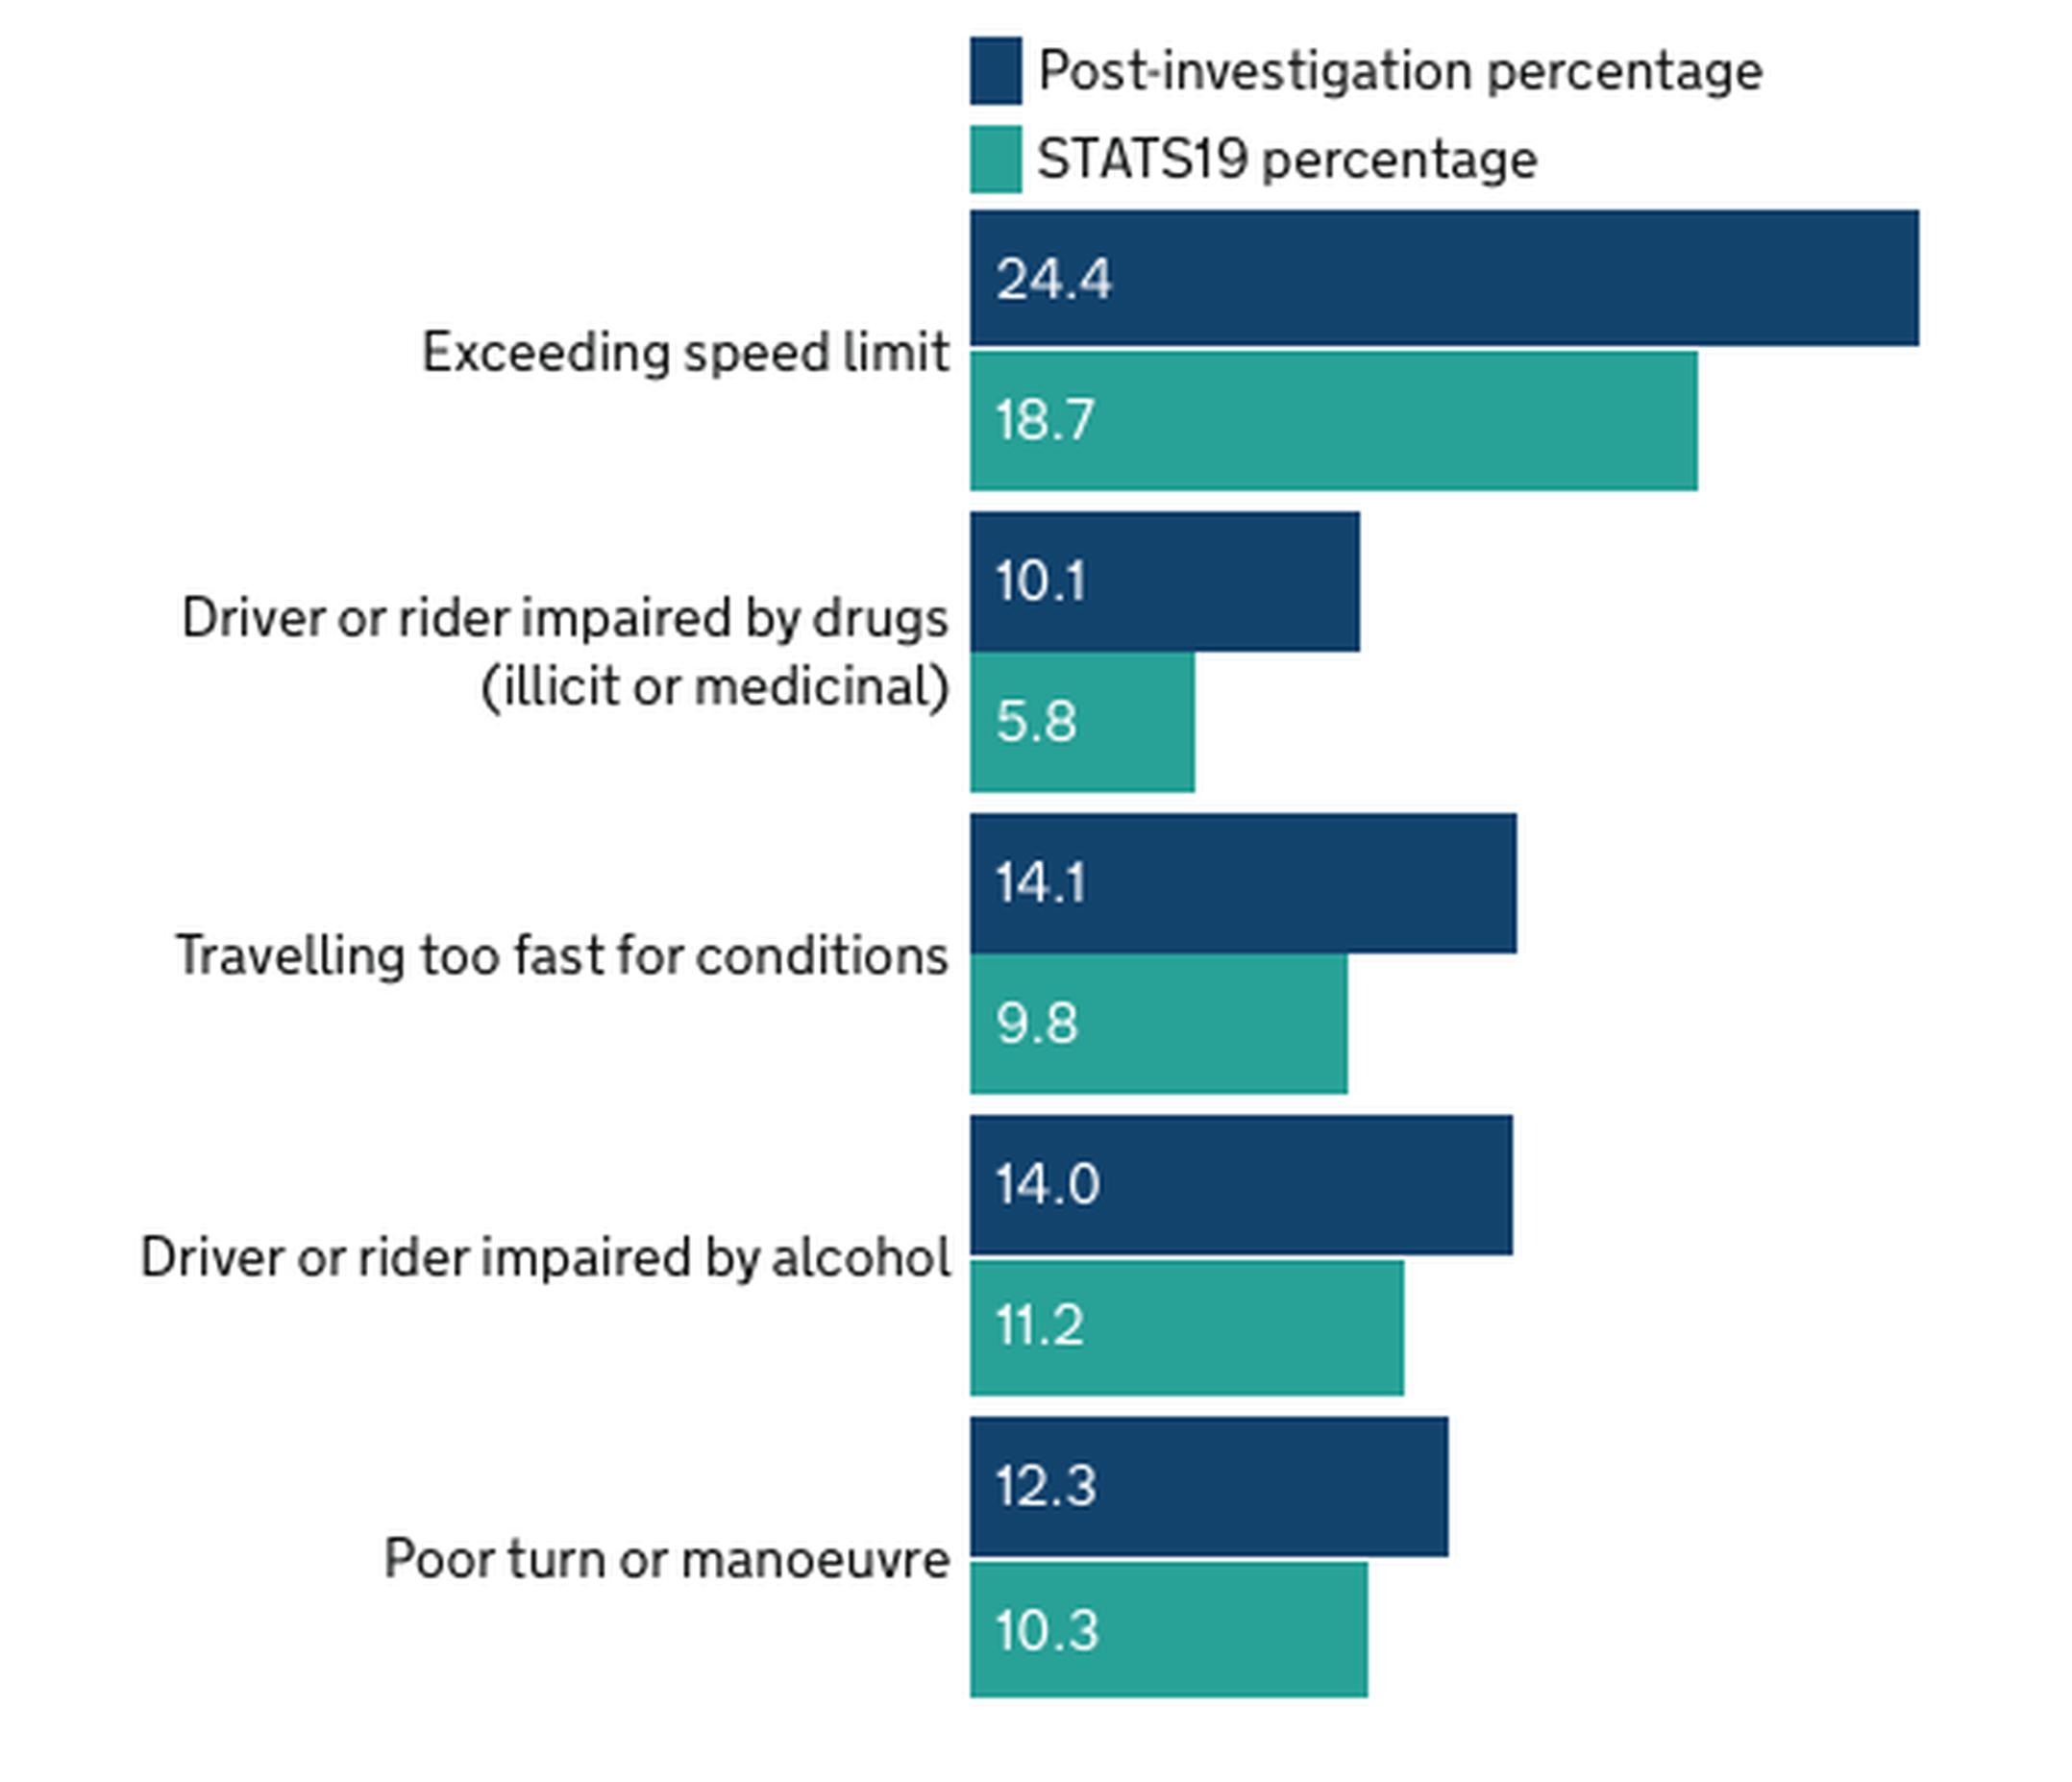 Top 5 most factors showing the biggest increase in reporting post-investigation compared with STATS19, 2021 fatal collisions